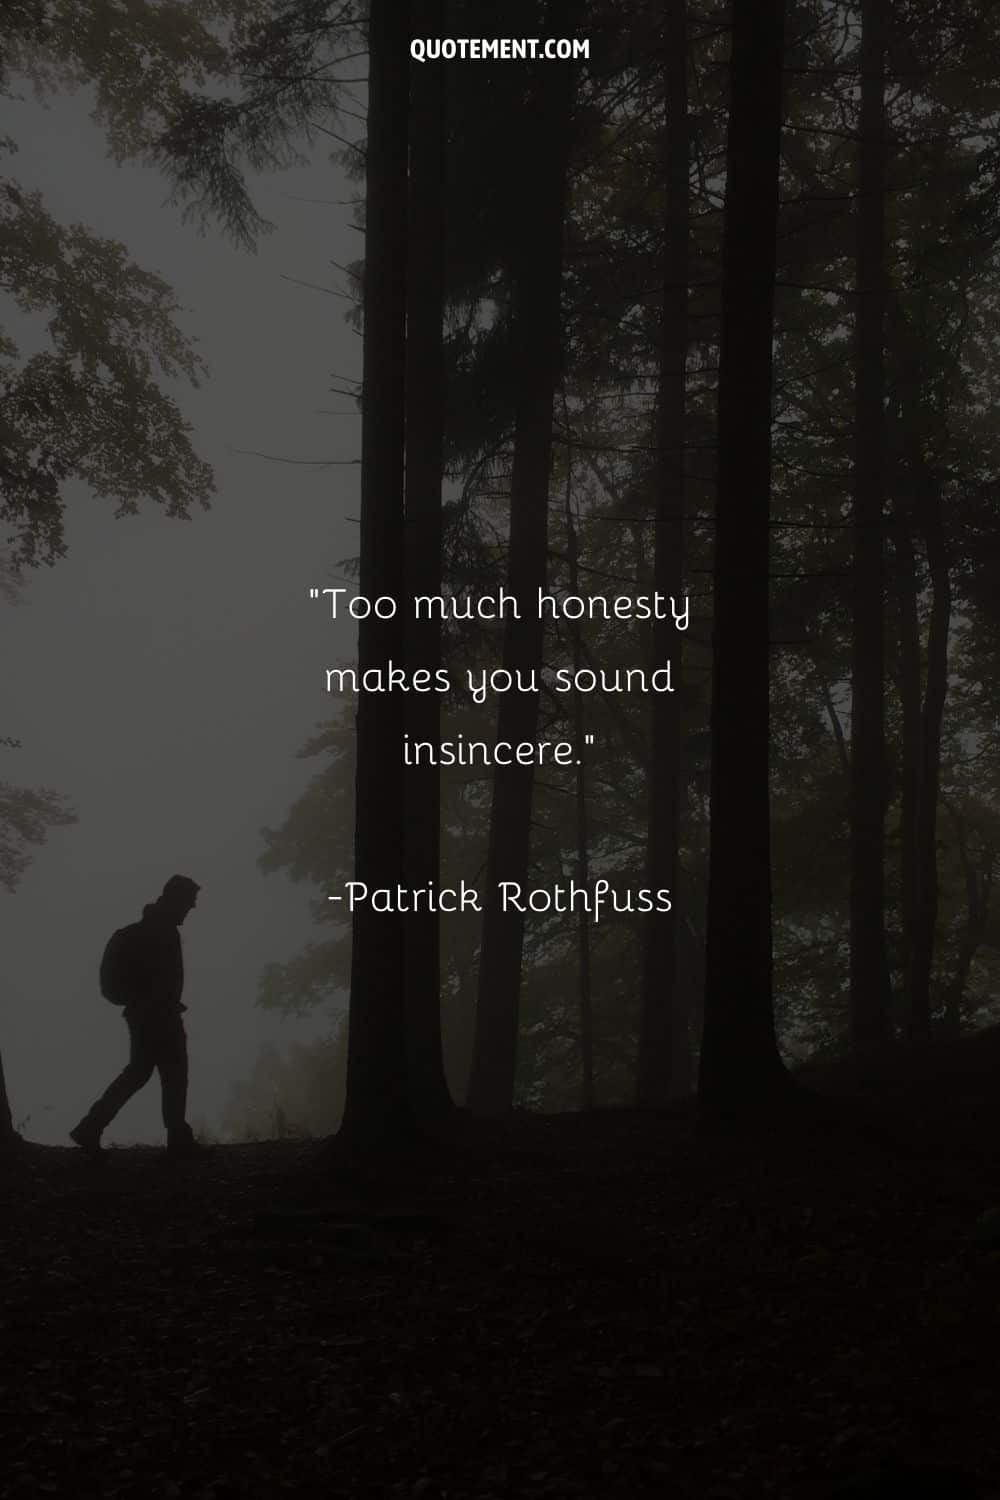 Too much honesty makes you sound insincere